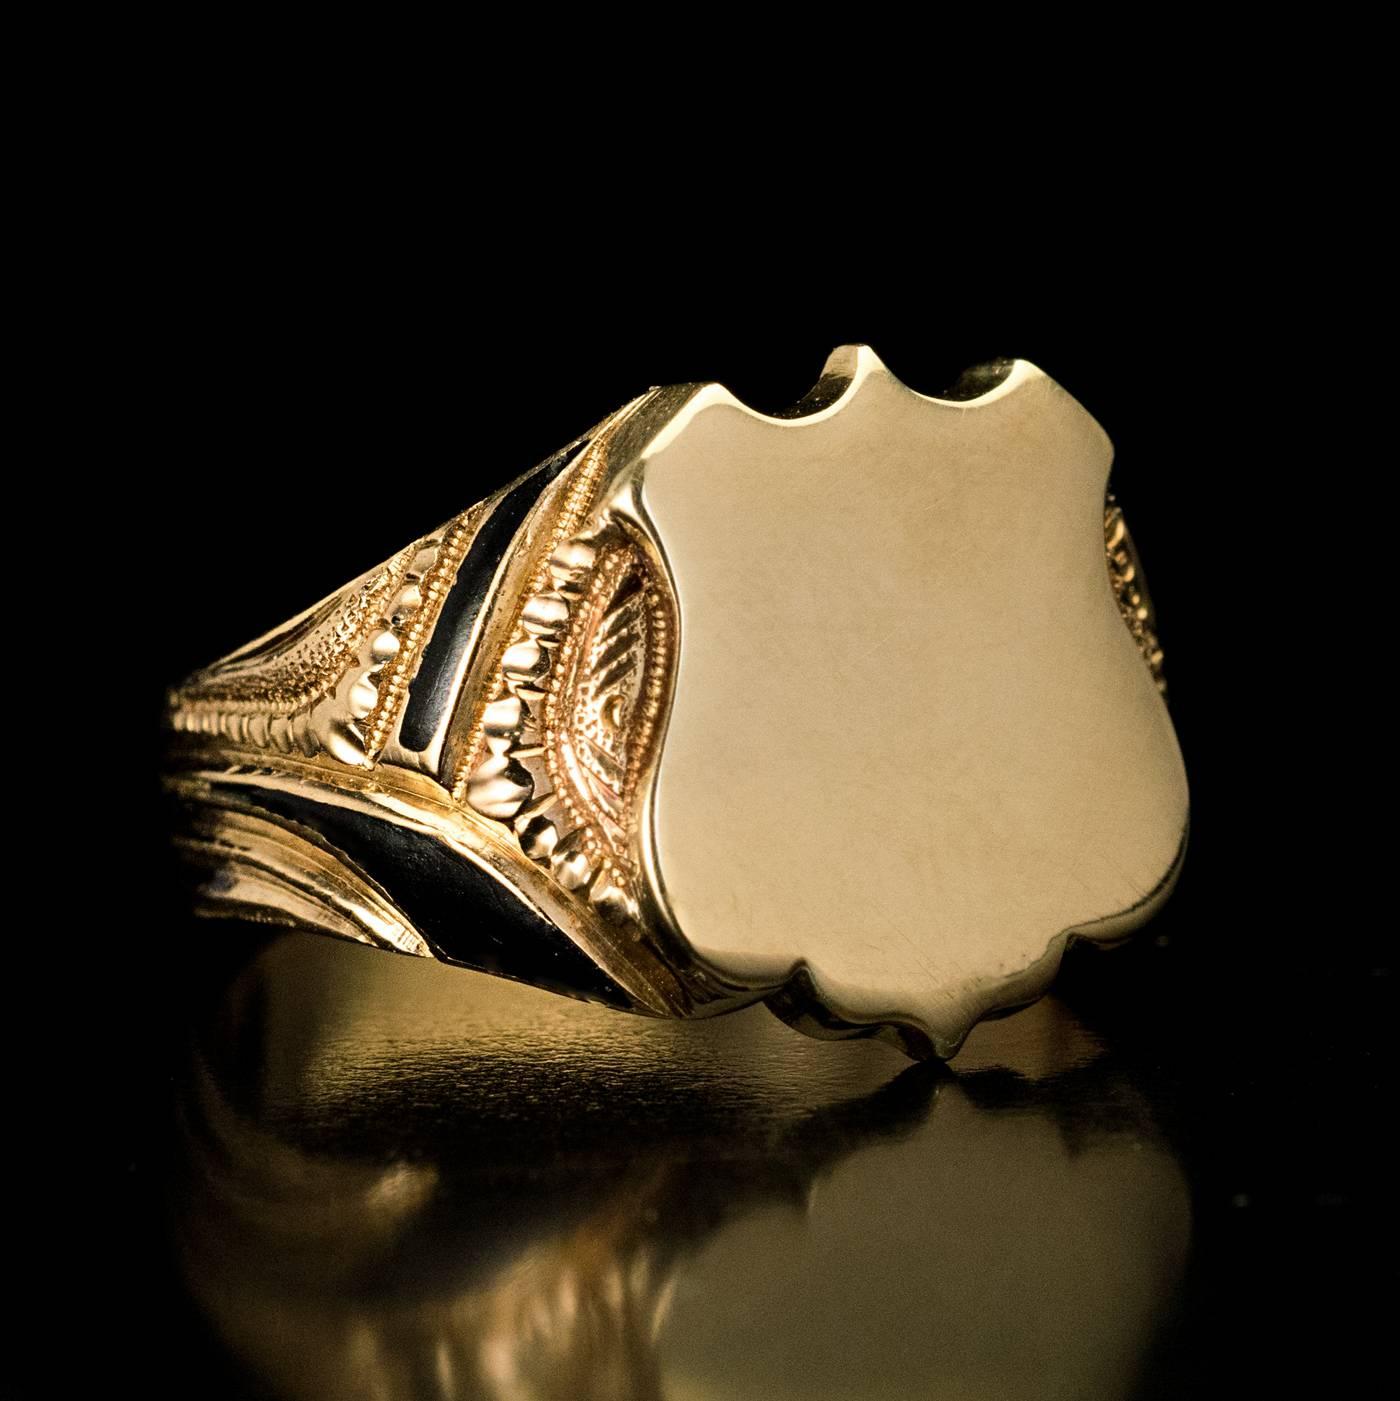 Made in Moscow in the 1880s

An antique 14K gold men’s ring is centered with a polished gold shield flanked by chased and engraved designs with black enamel accents. The ring is marked with 56 zolotnik Imperial gold standard with Moscow assay mark